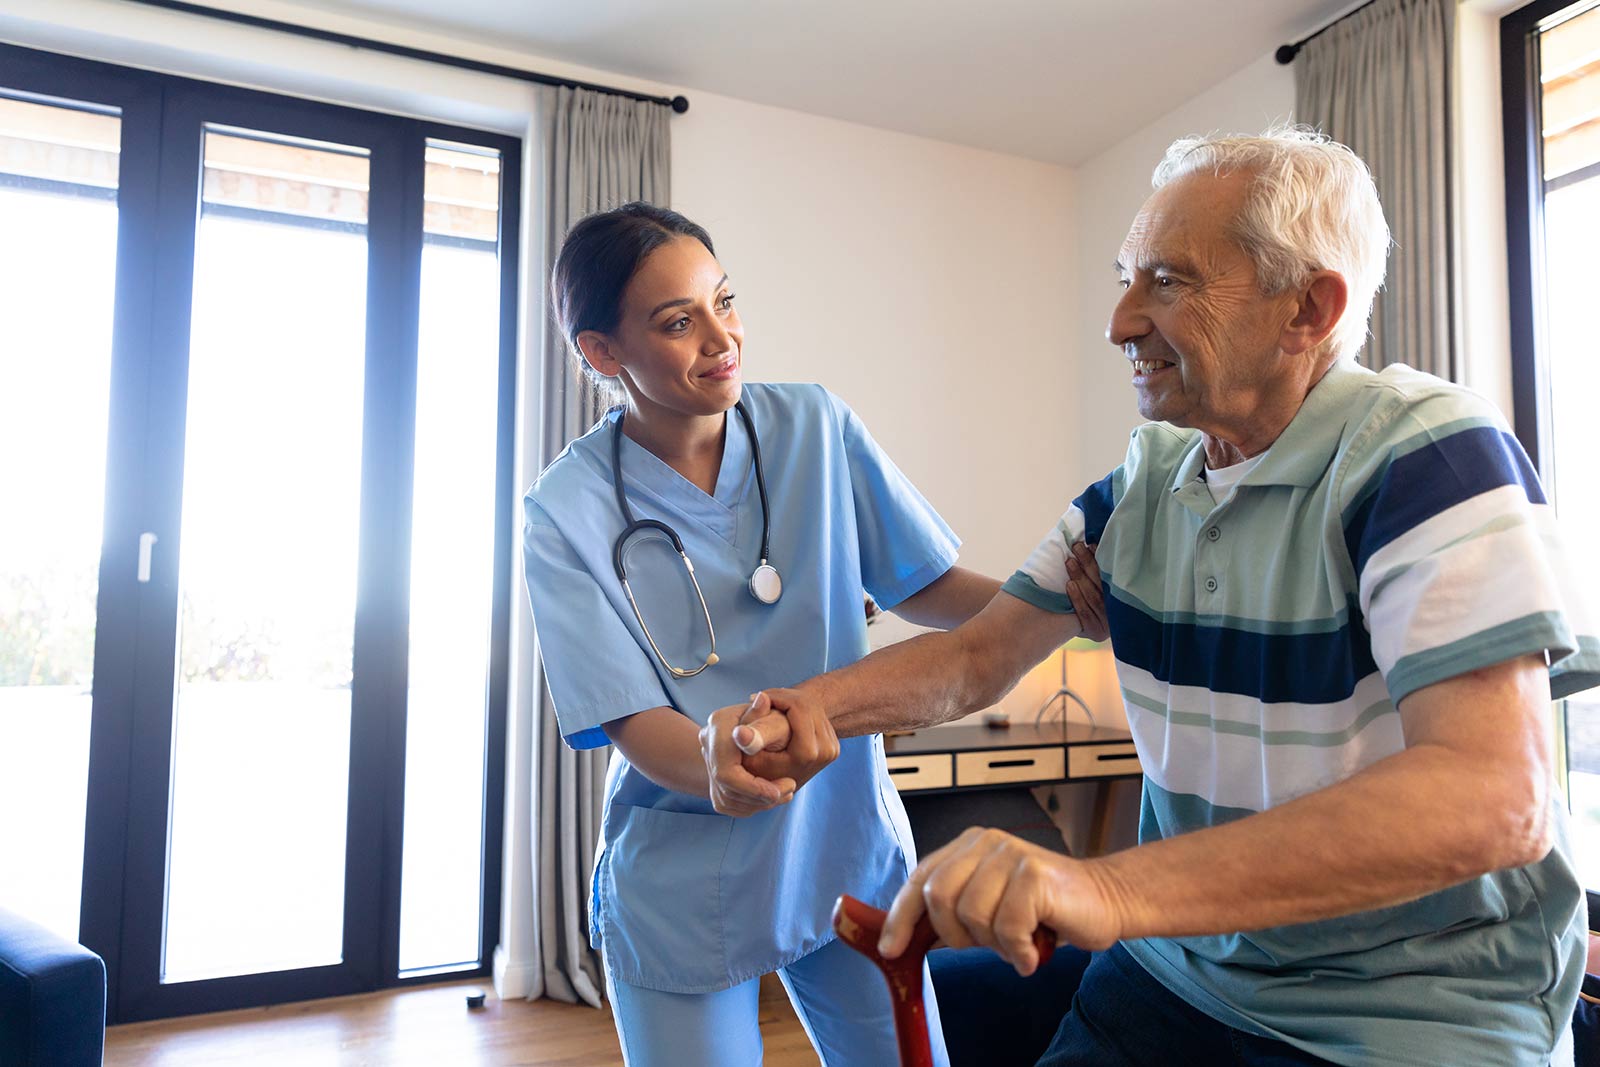 Three ways seniors can benefit from physiotherapy at home